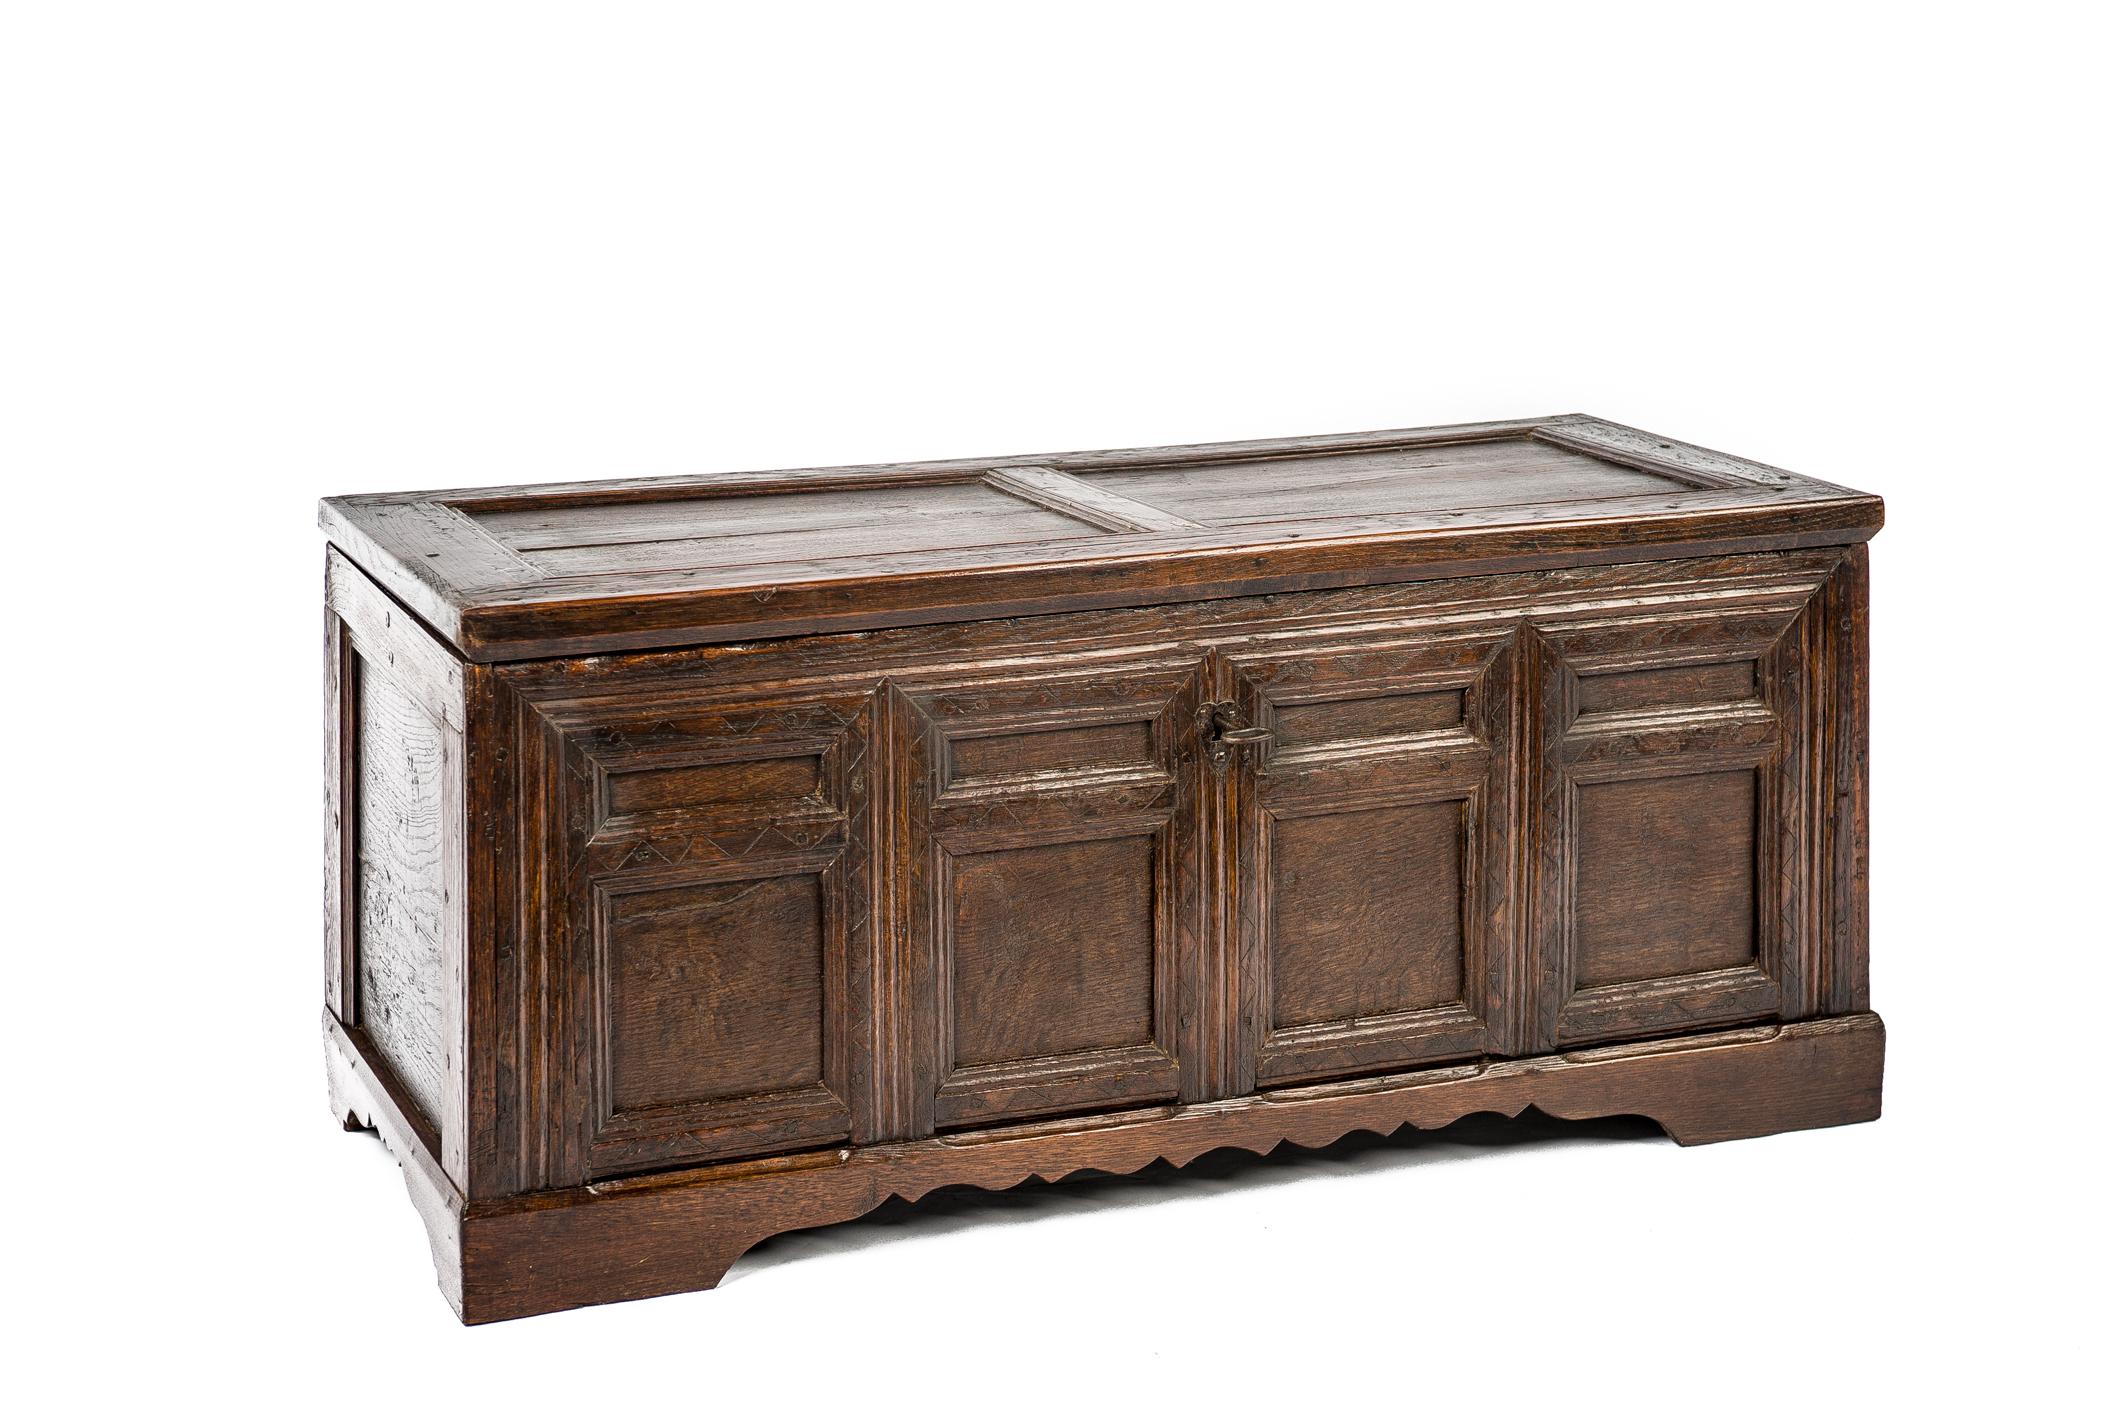 William and Mary Antique Early 18th Century Warm Brown Paneled and Carved Oak Chest or Coffer For Sale